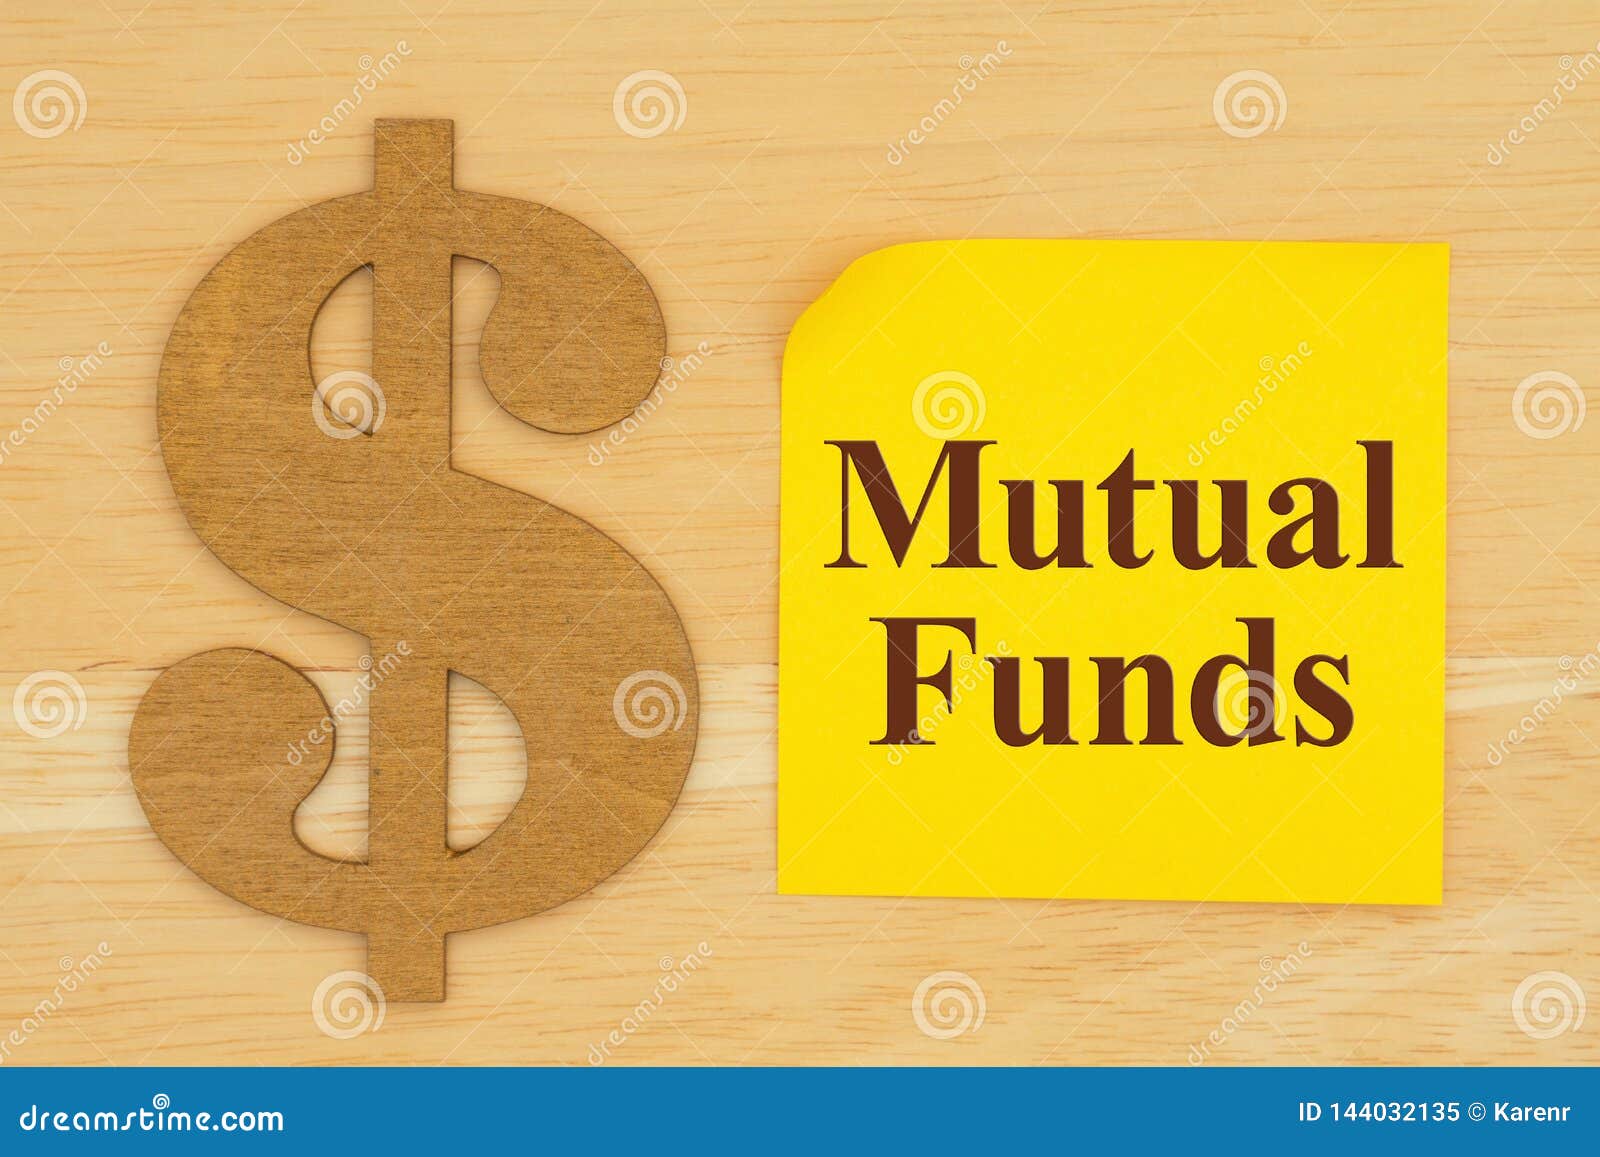 Mutual Fund Text On Yellow Blank Sticky Note With A Dollar Sign On